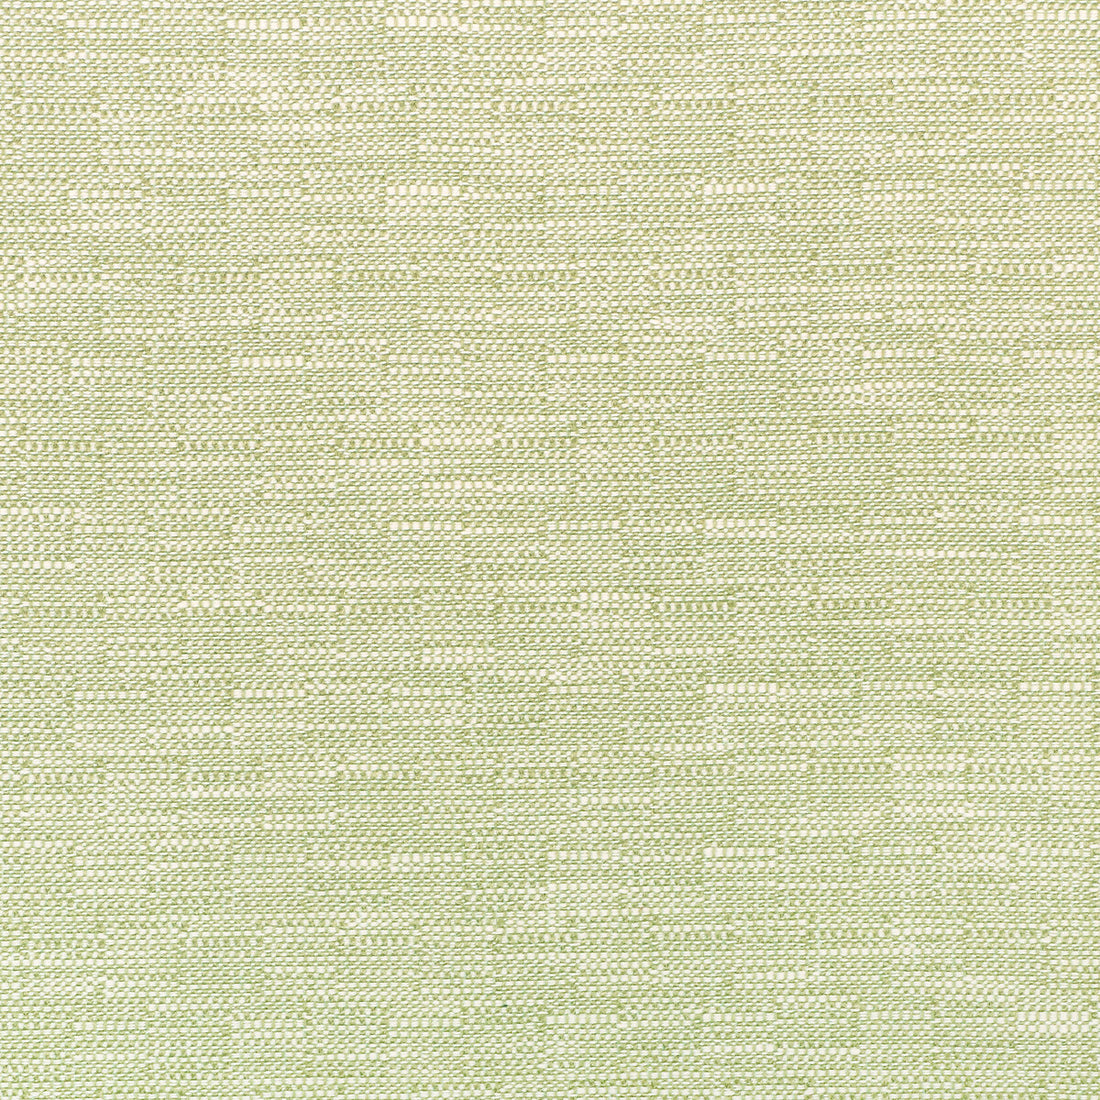 Kravet Smart fabric in 35518-13 color - pattern 35518.13.0 - by Kravet Smart in the Inside Out Performance Fabrics collection